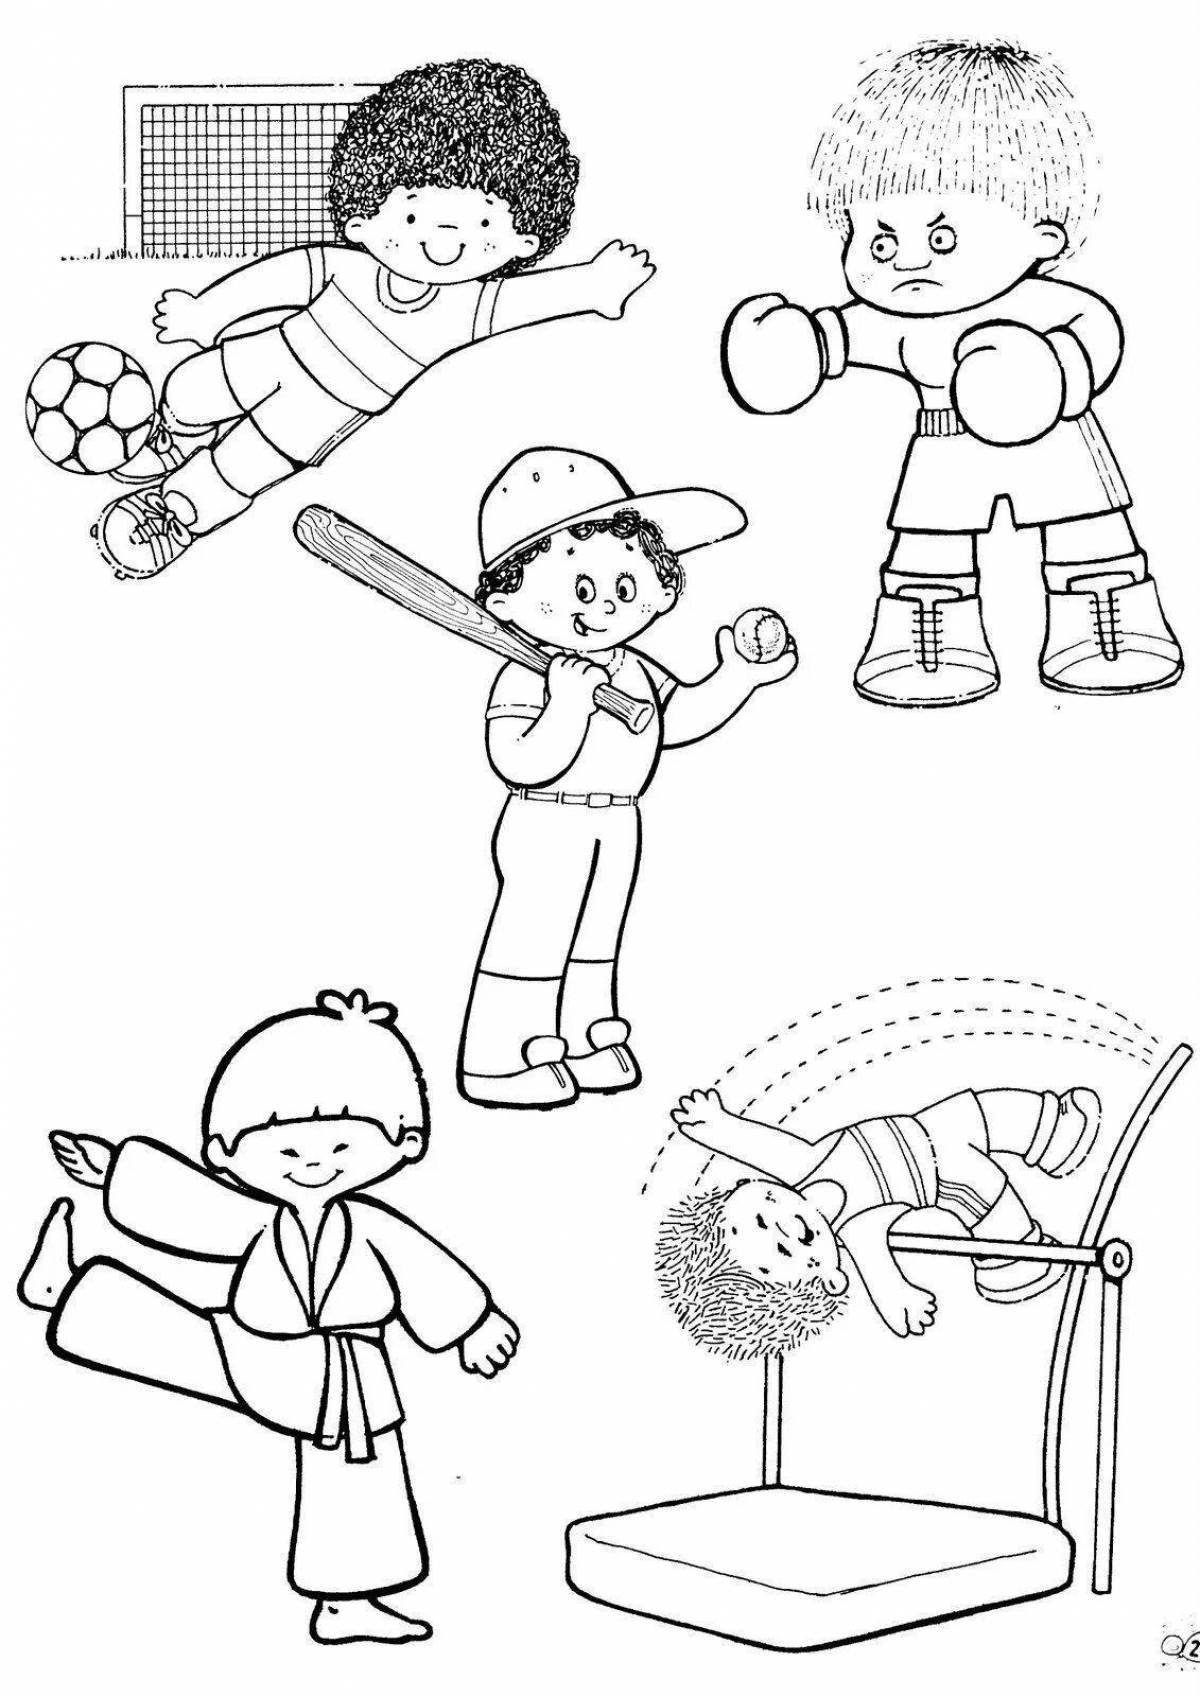 Physical education for grade 1 coloring page